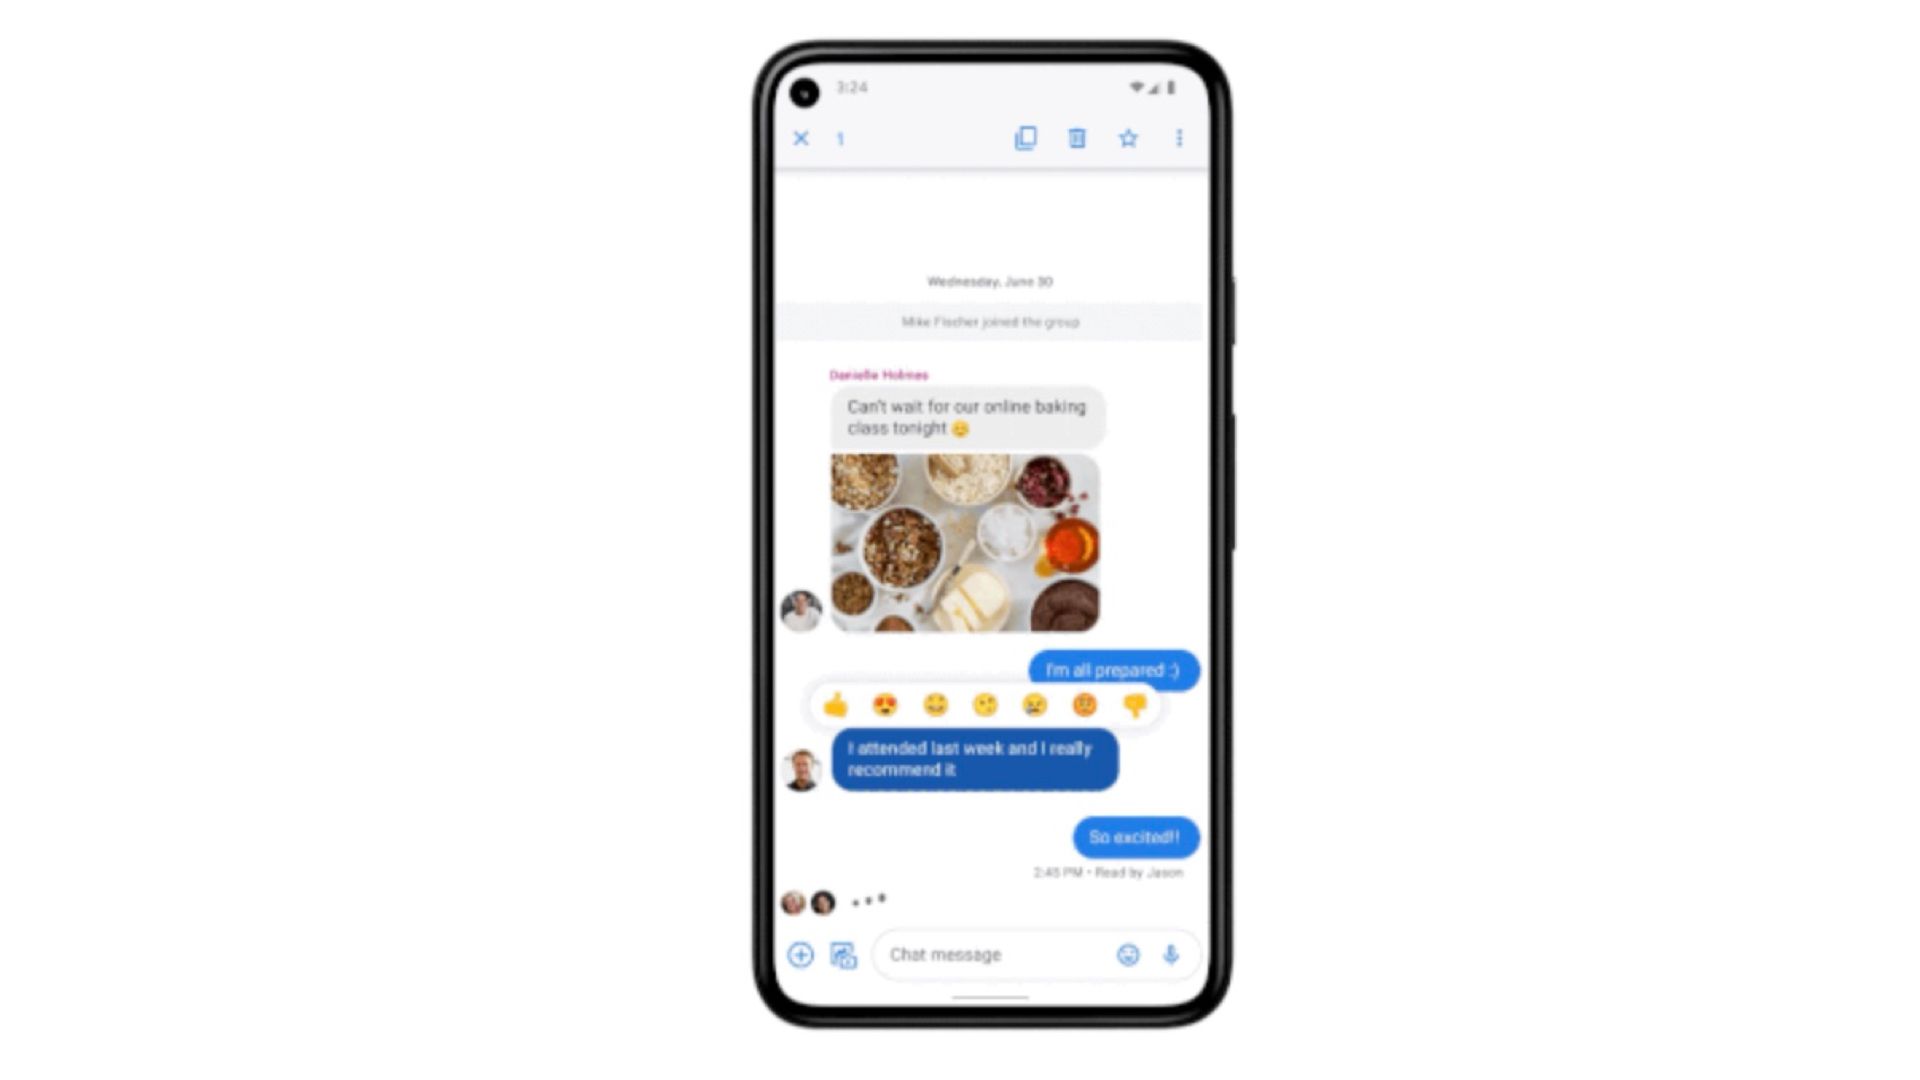 Google Messages features